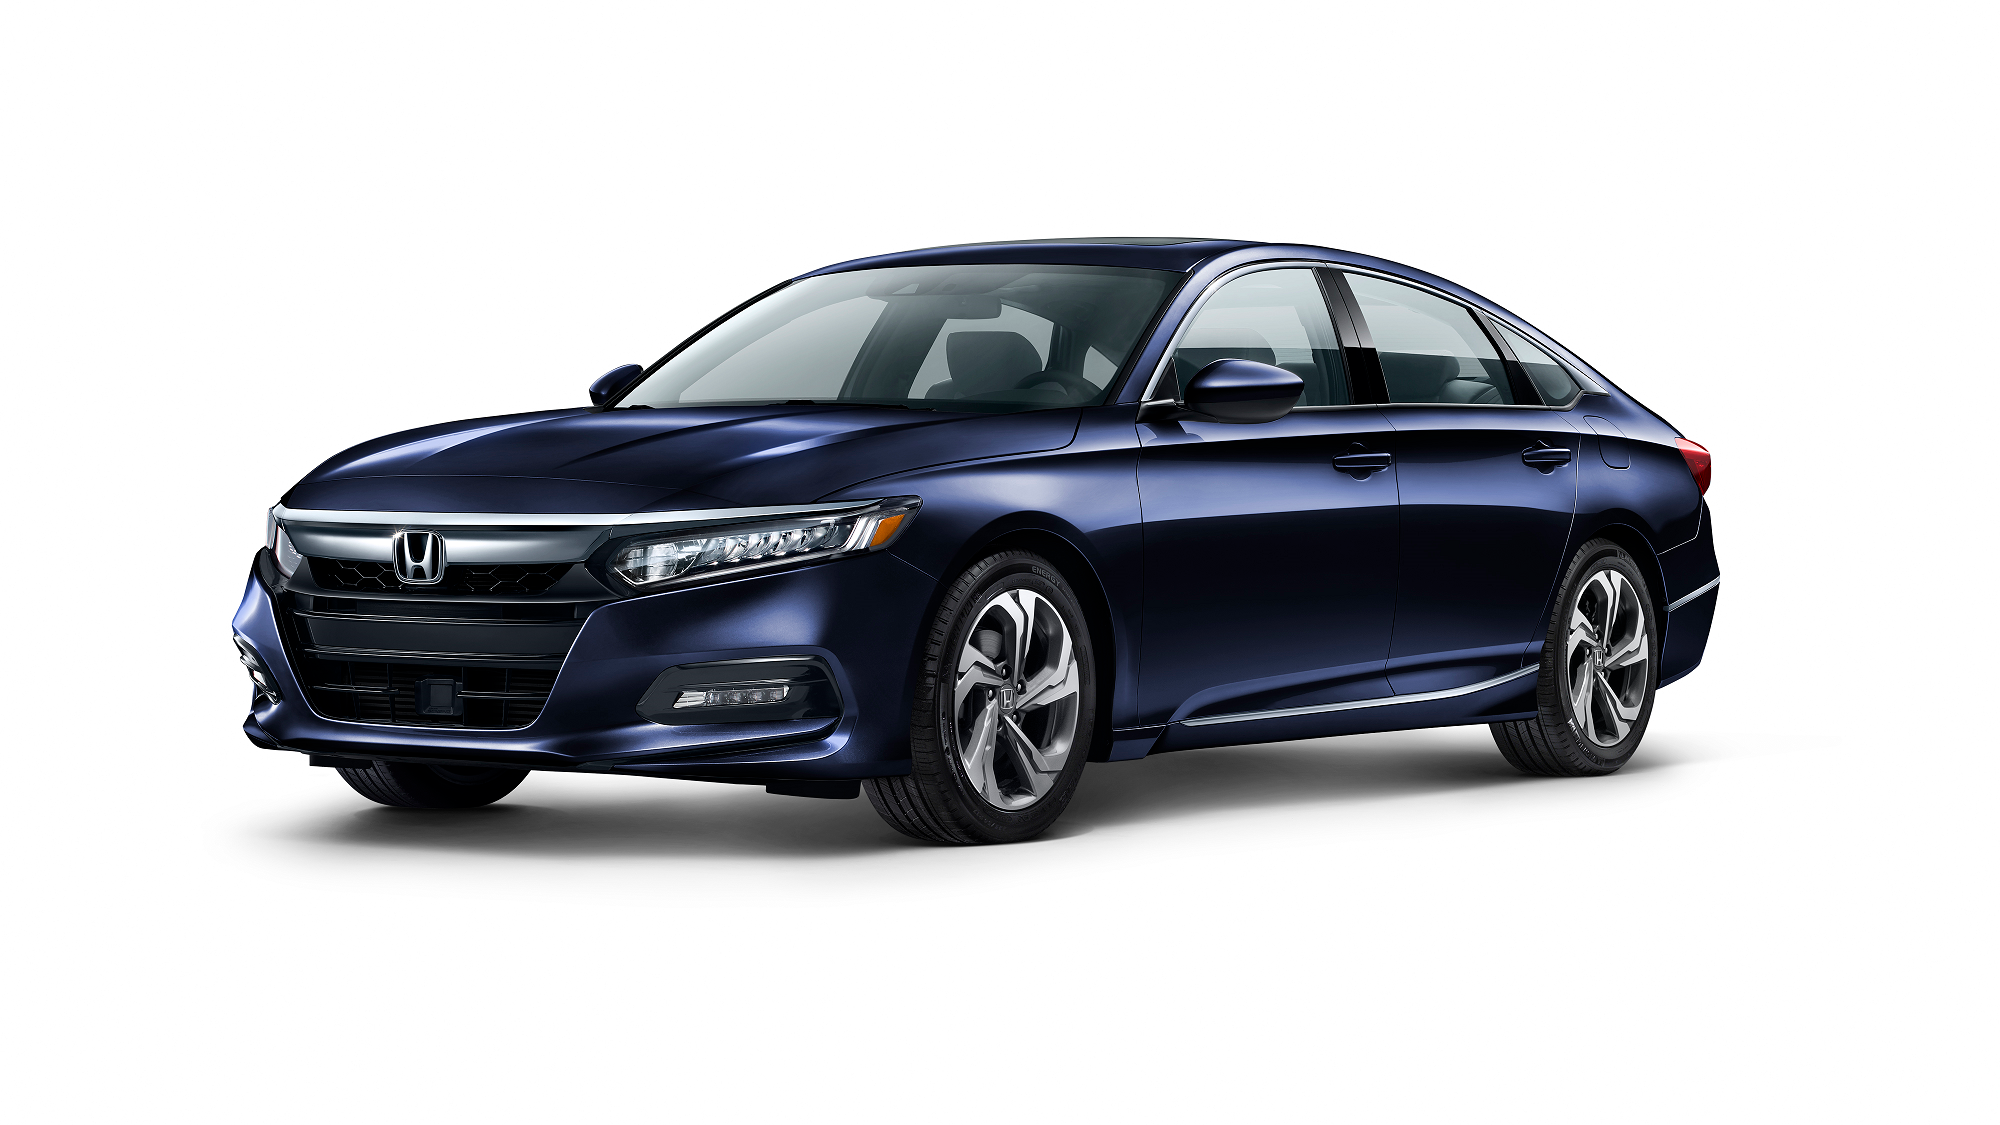 Top-notch service for your Honda Accord